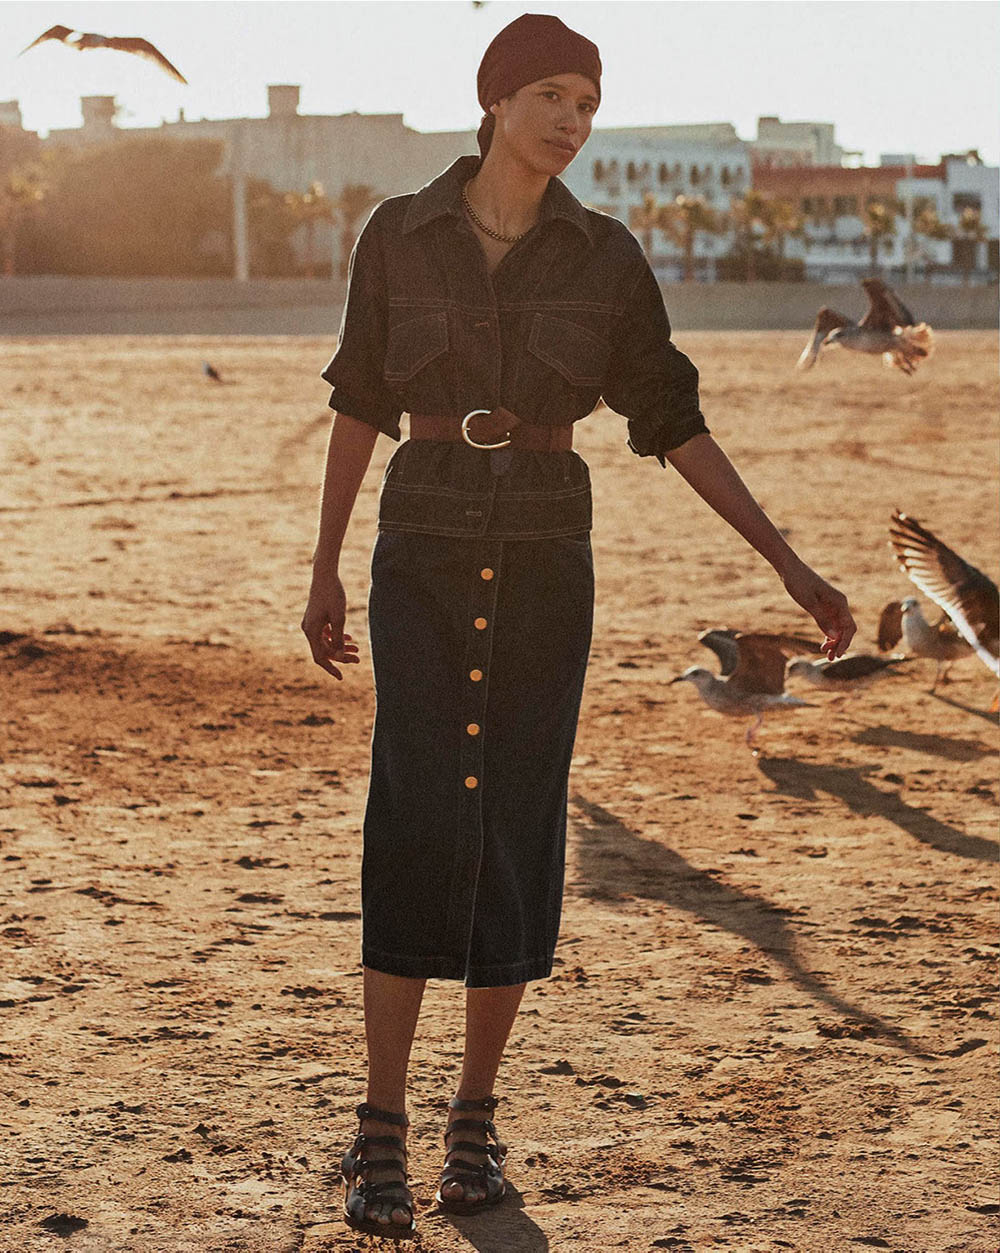 Dilone by Sonia Szóstak for Porter Magazine Summer 2019